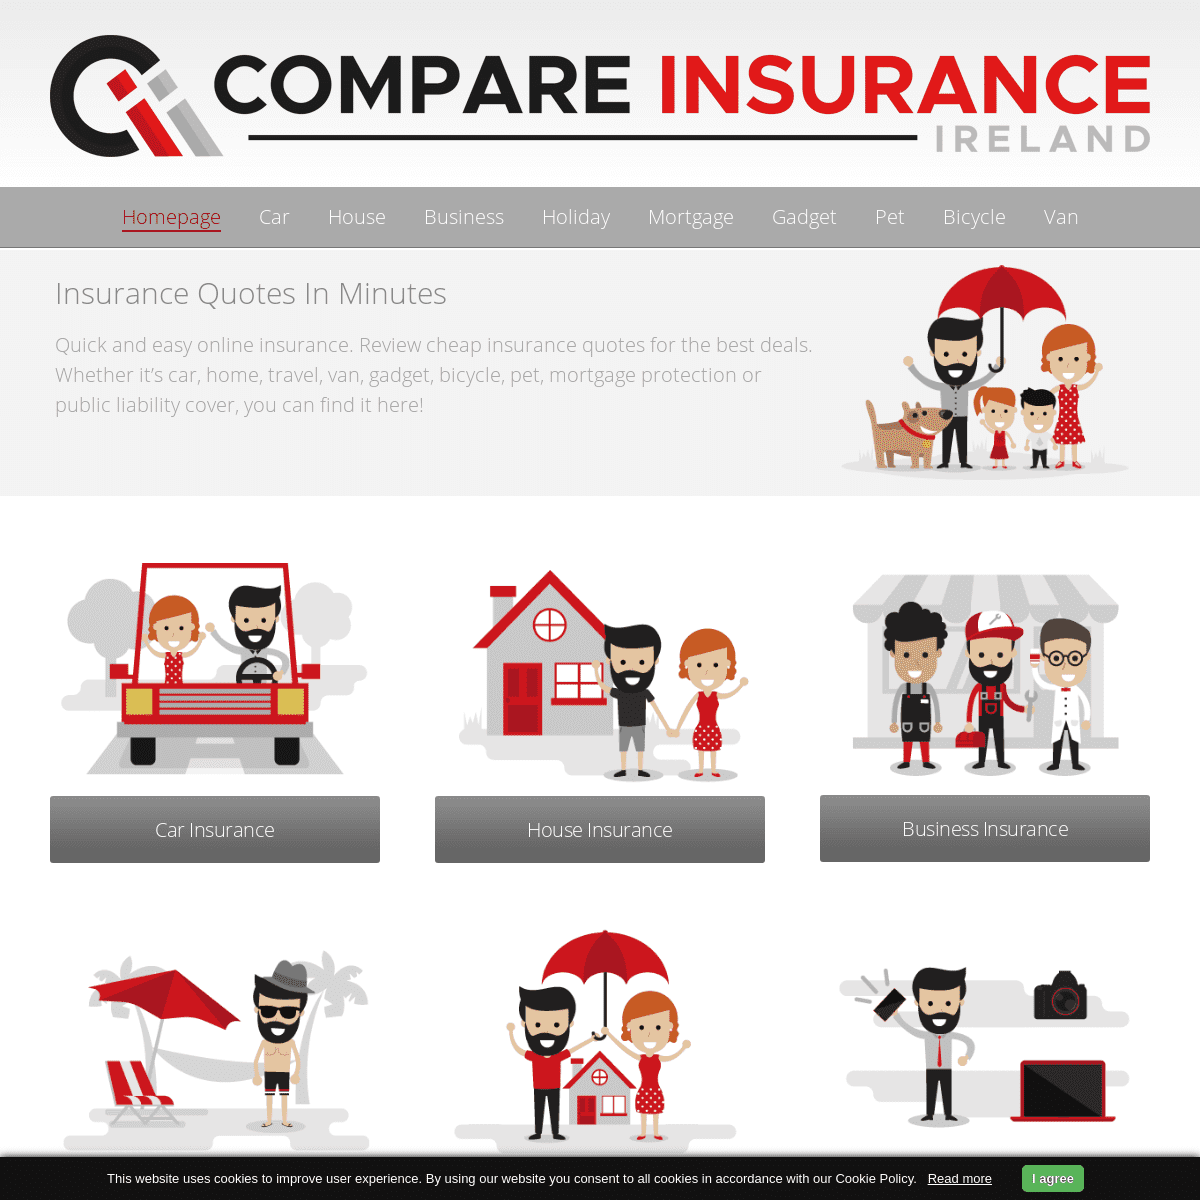 Compare Cheap Insurance Quotes with CompareInsuranceIreland